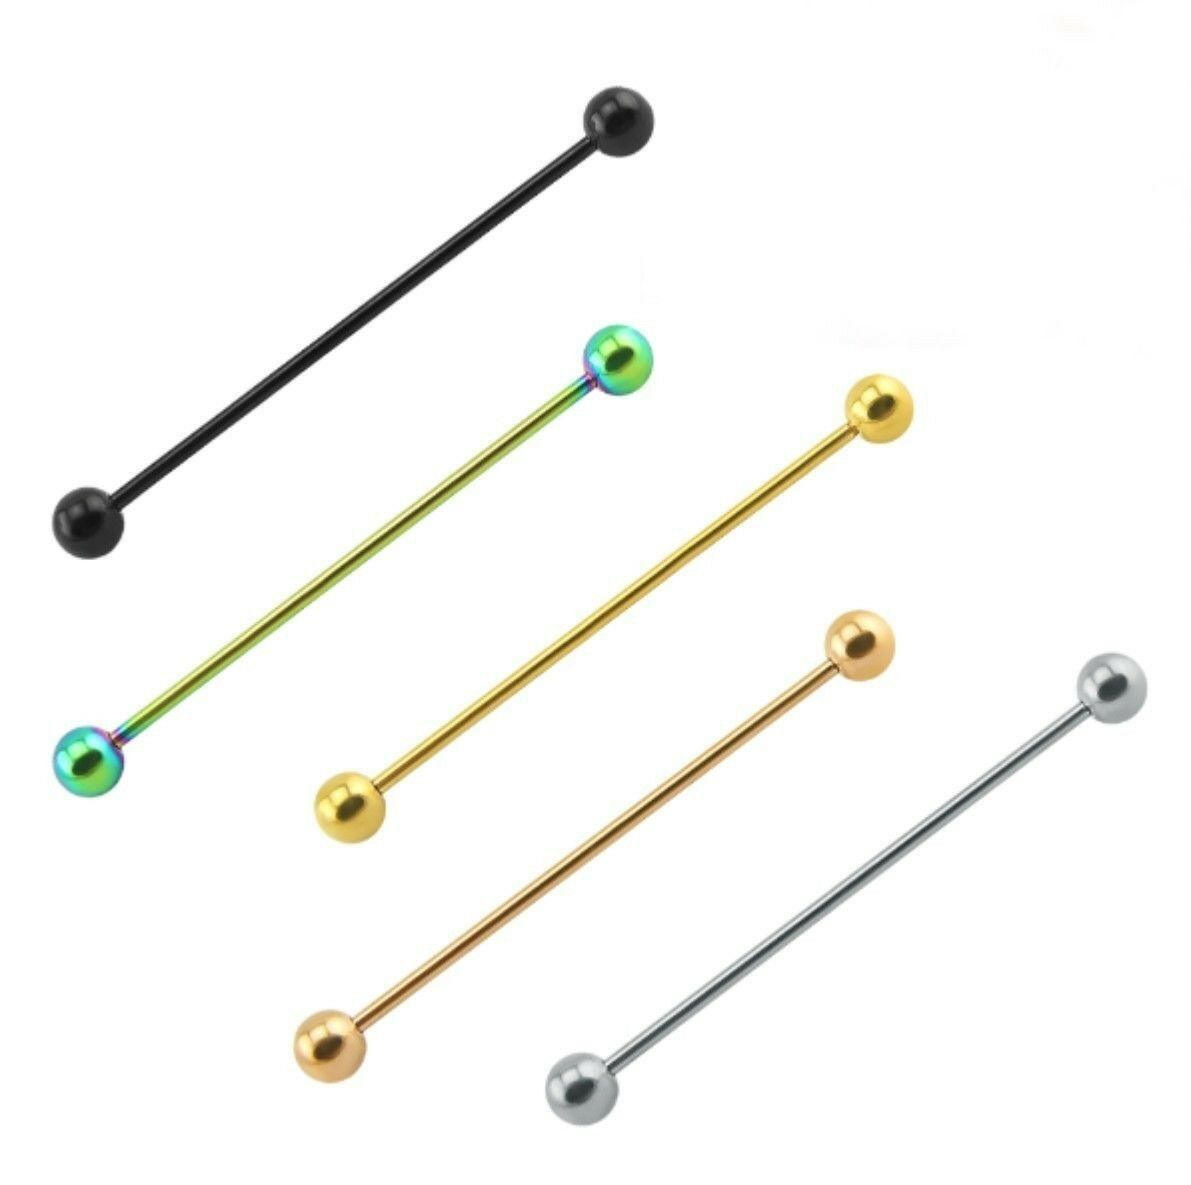 Eclectic Shop Uk Ltd - Scaffold bar titanium industrial barbell piercing anodized 50mm 14g 5 colours